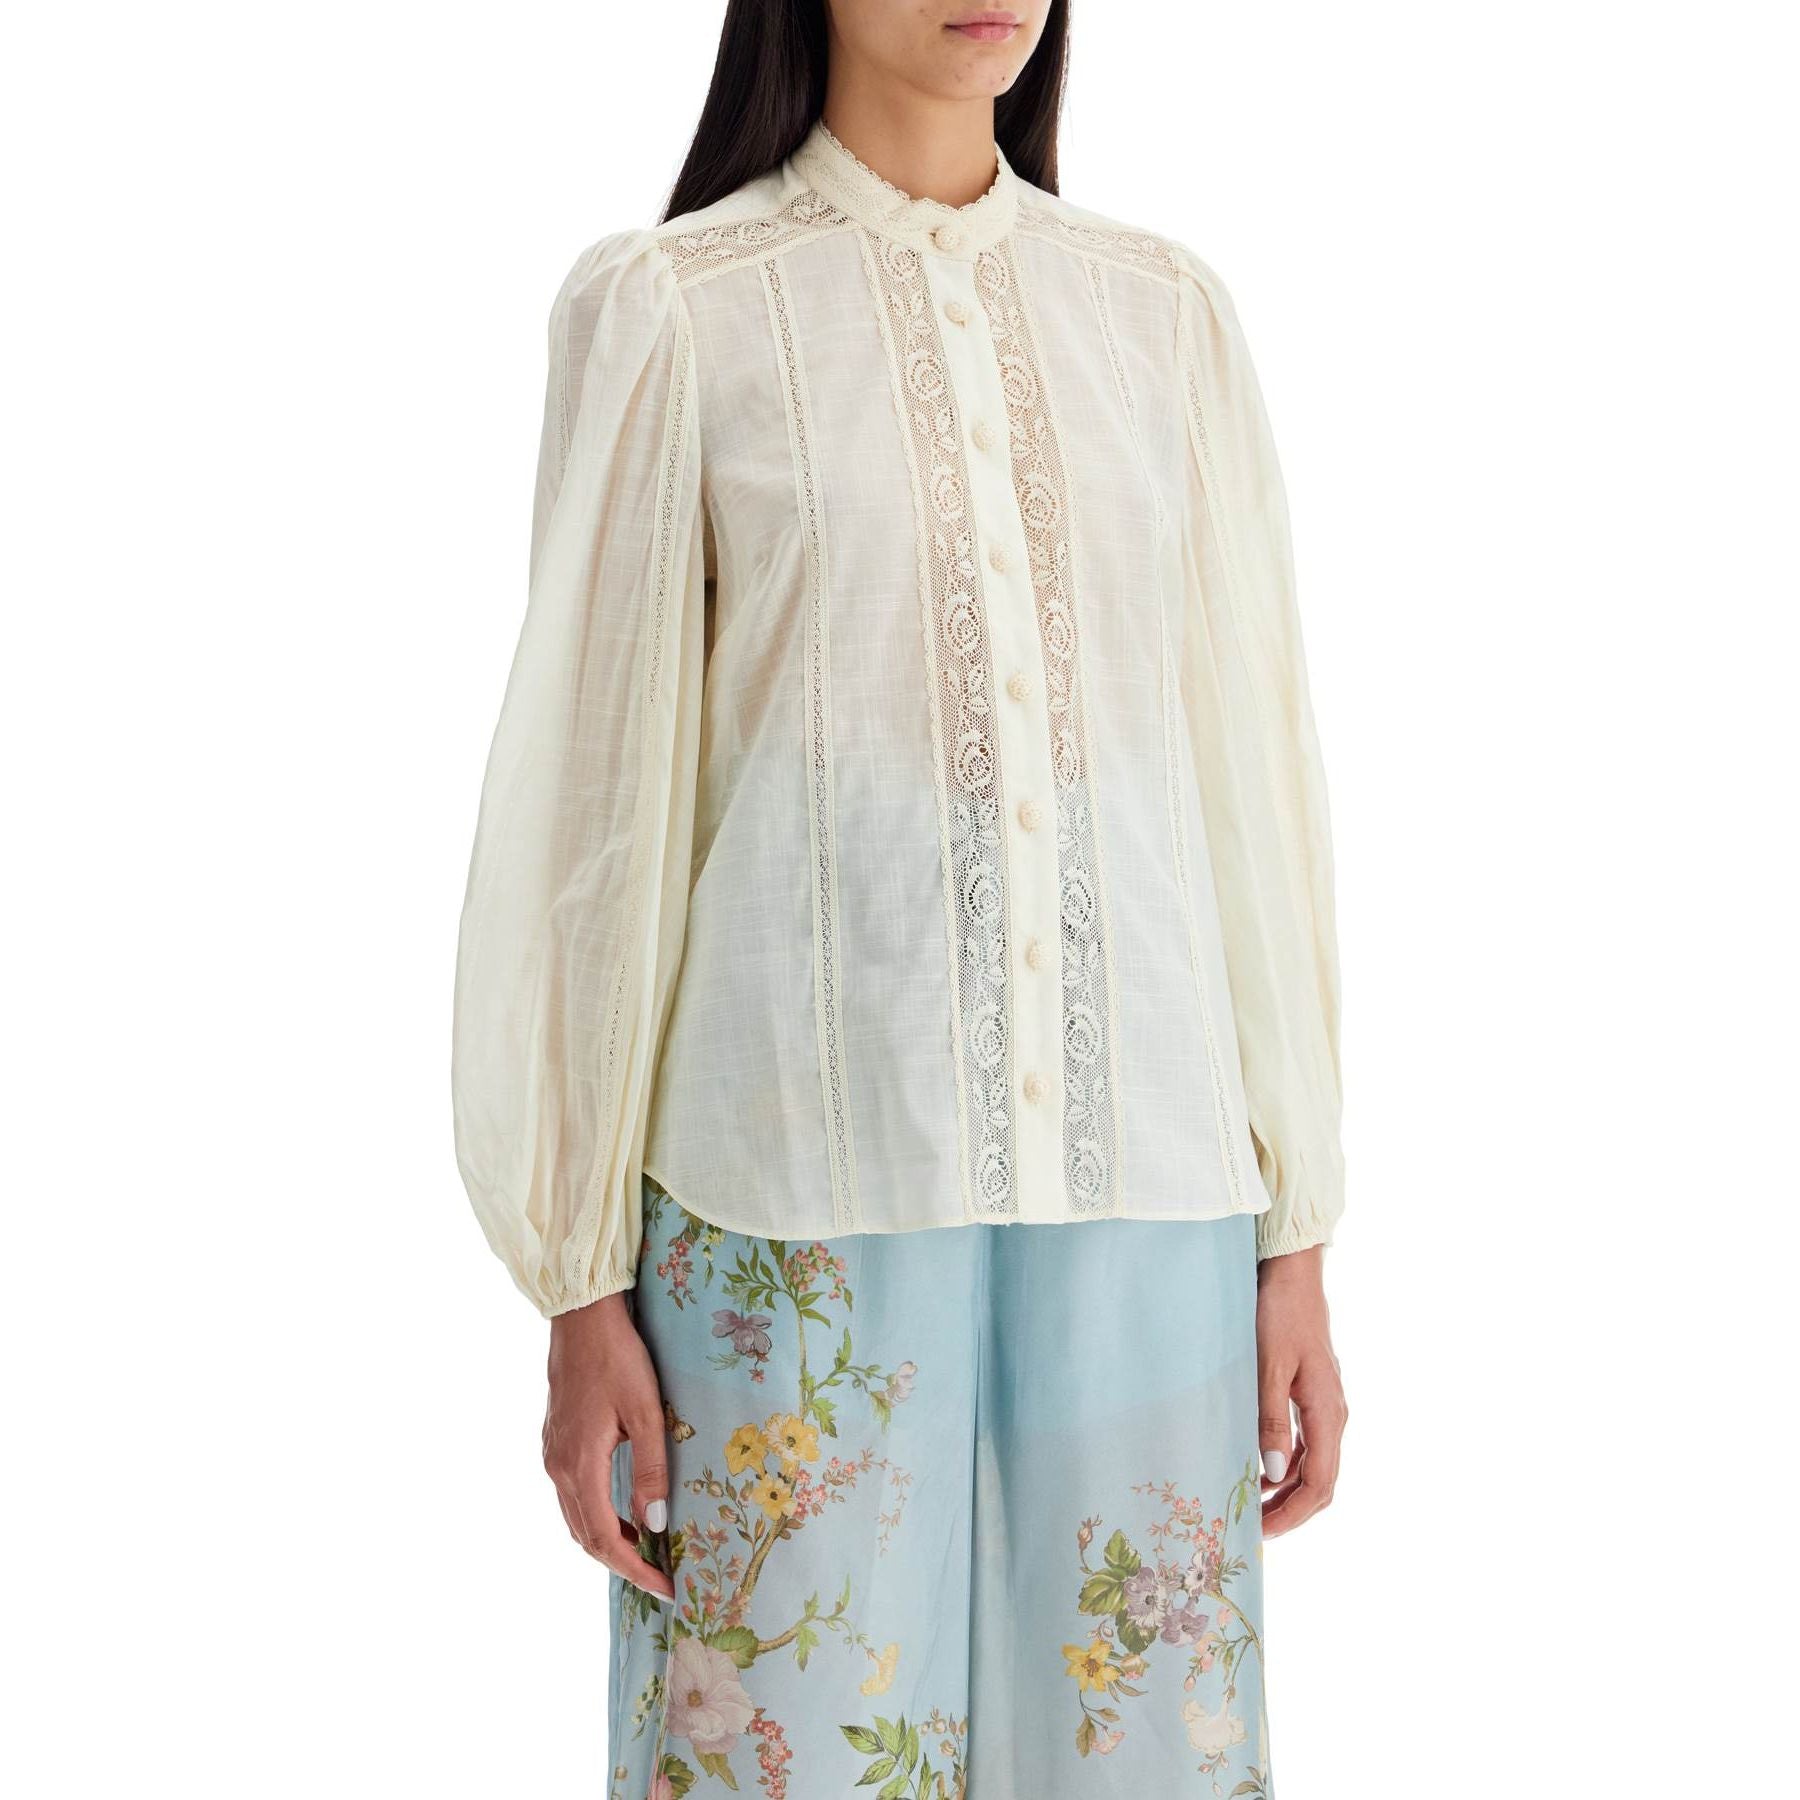 Halliday Lace Trimmed Shirt